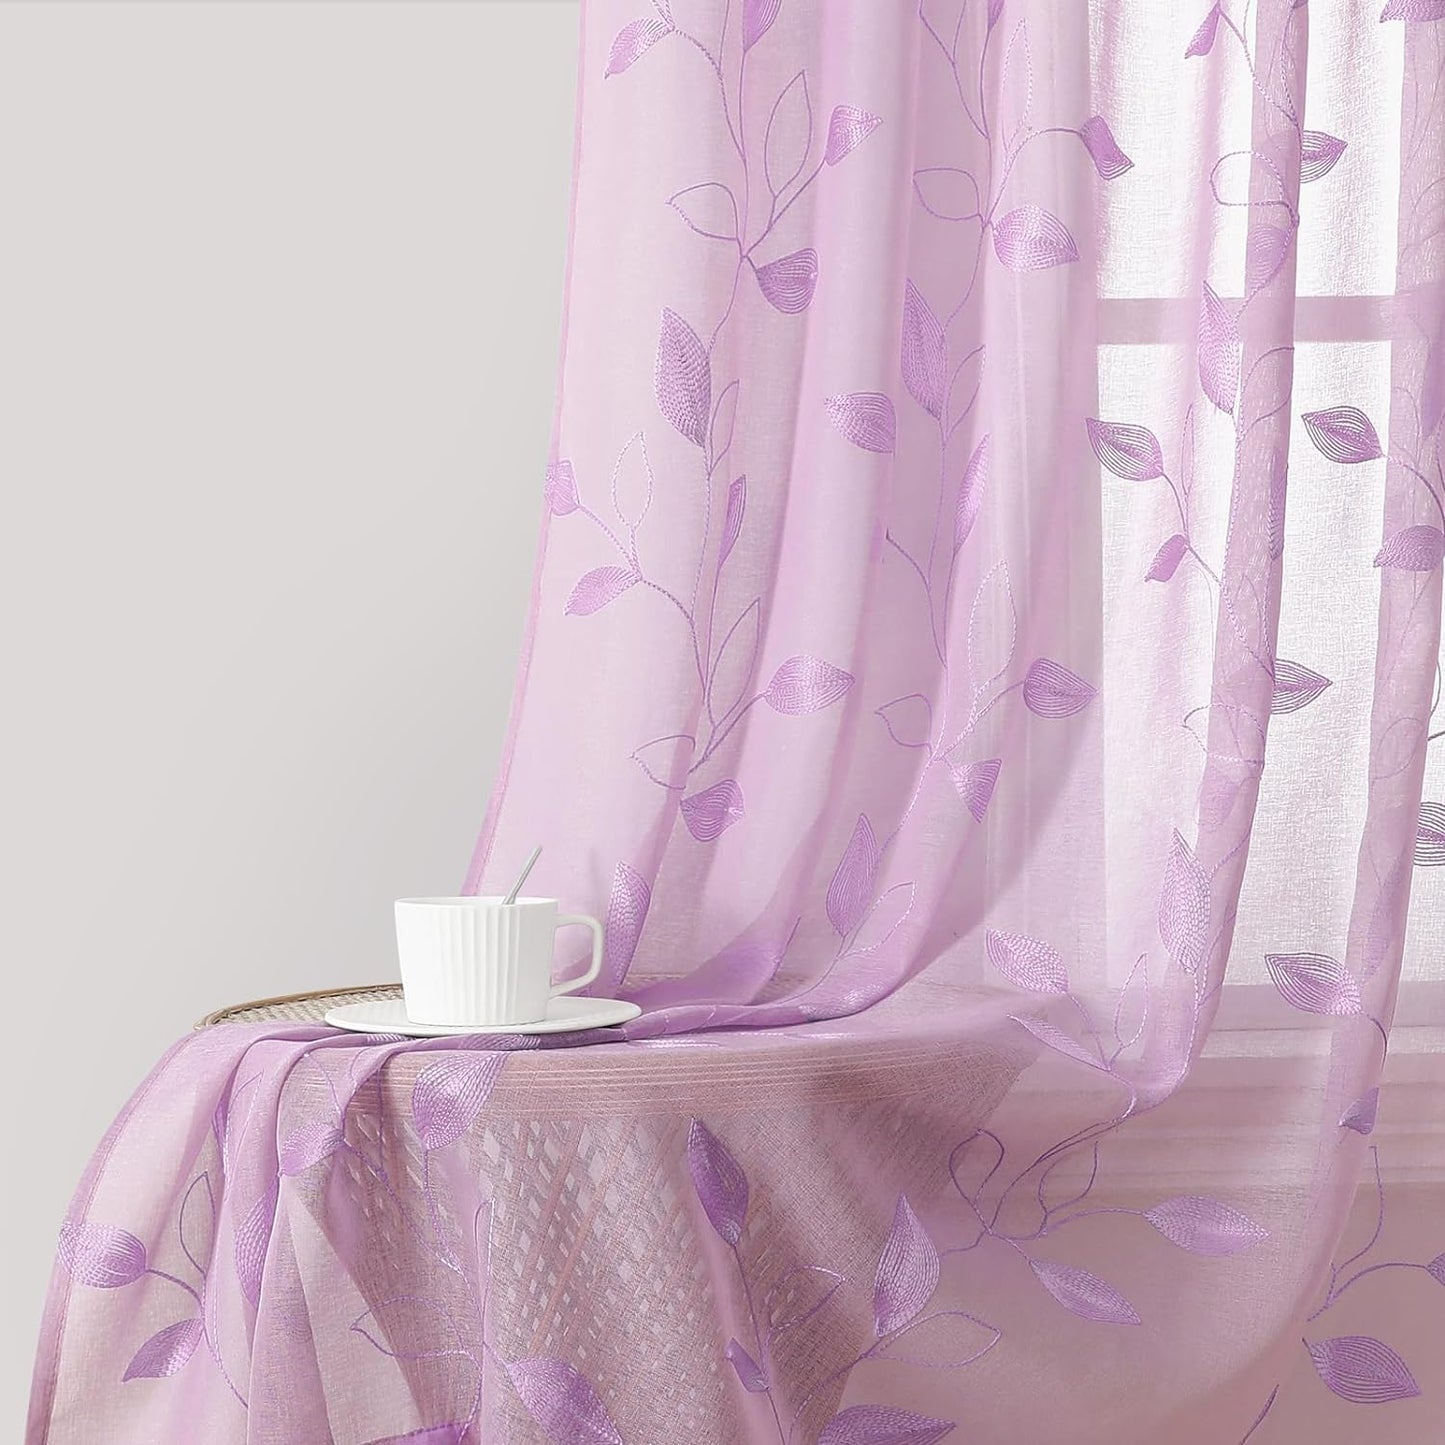 HOMEIDEAS Sage Green Sheer Curtains 52 X 63 Inches Length 2 Panels Embroidered Leaf Pattern Pocket Faux Linen Floral Semi Sheer Voile Window Curtains/Drapes for Bedroom Living Room  HOMEIDEAS Purple W52" X L63" 